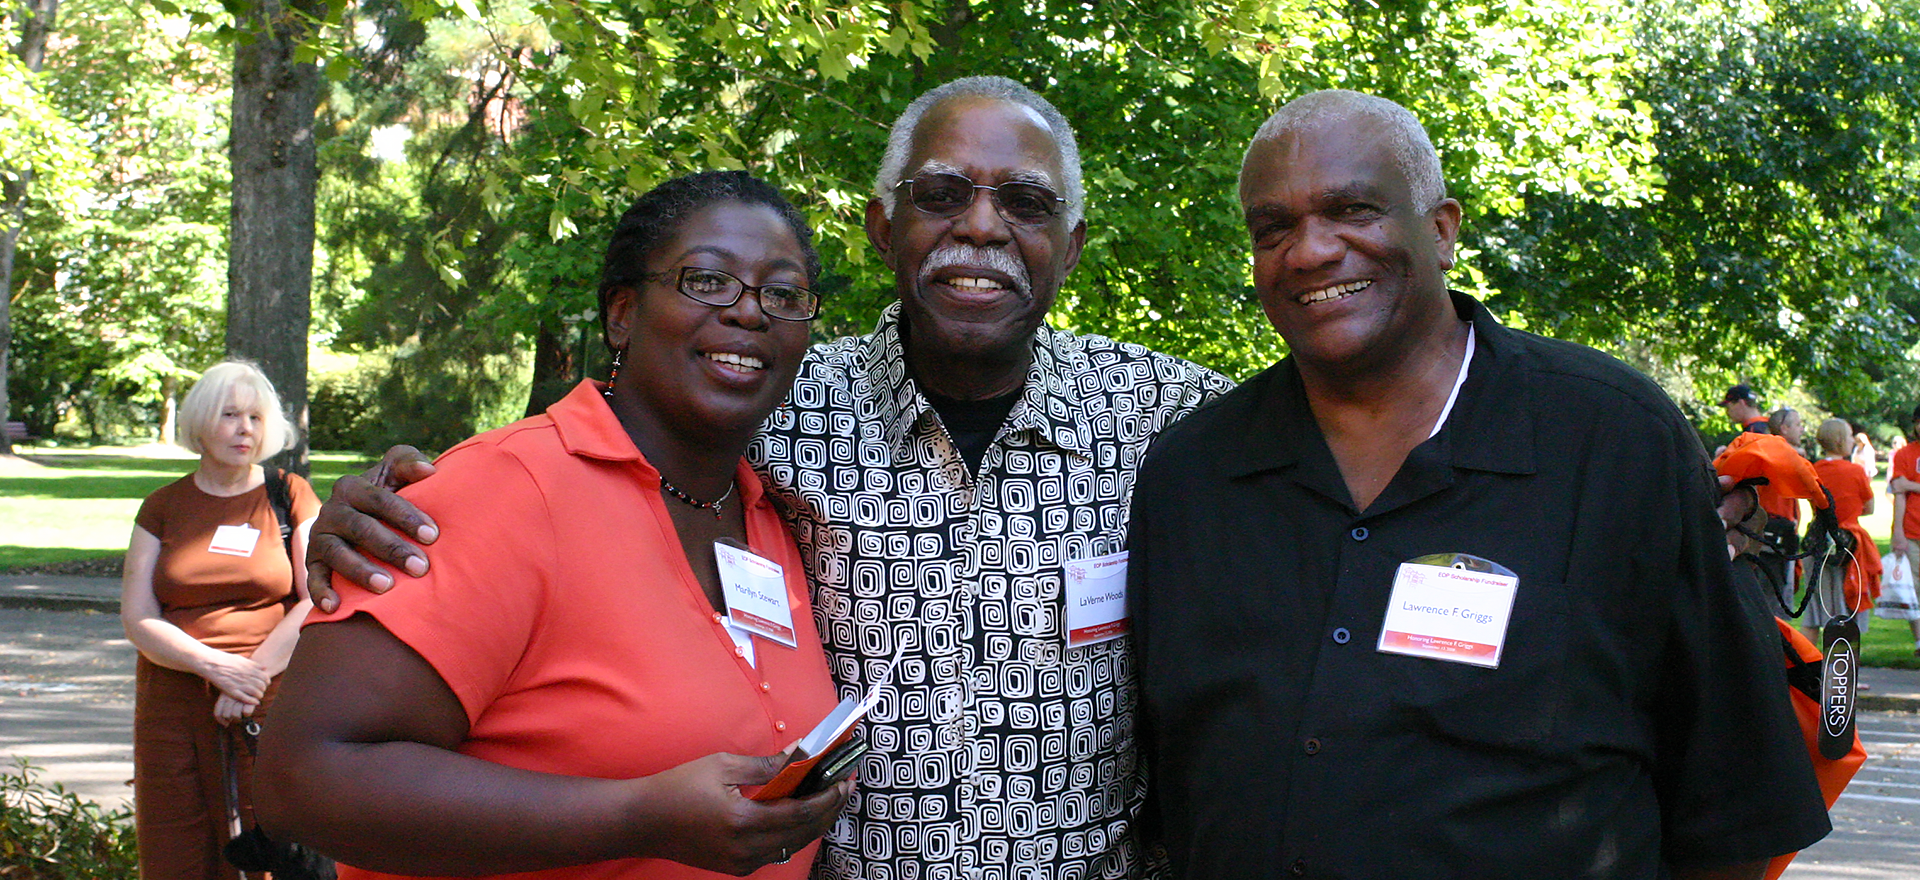 The late Larry Griggs (right), community leader and longtime director of OSU's Educational Opportunities Program. Pictured here with LaVerne Woods and Marilyn Stewart.